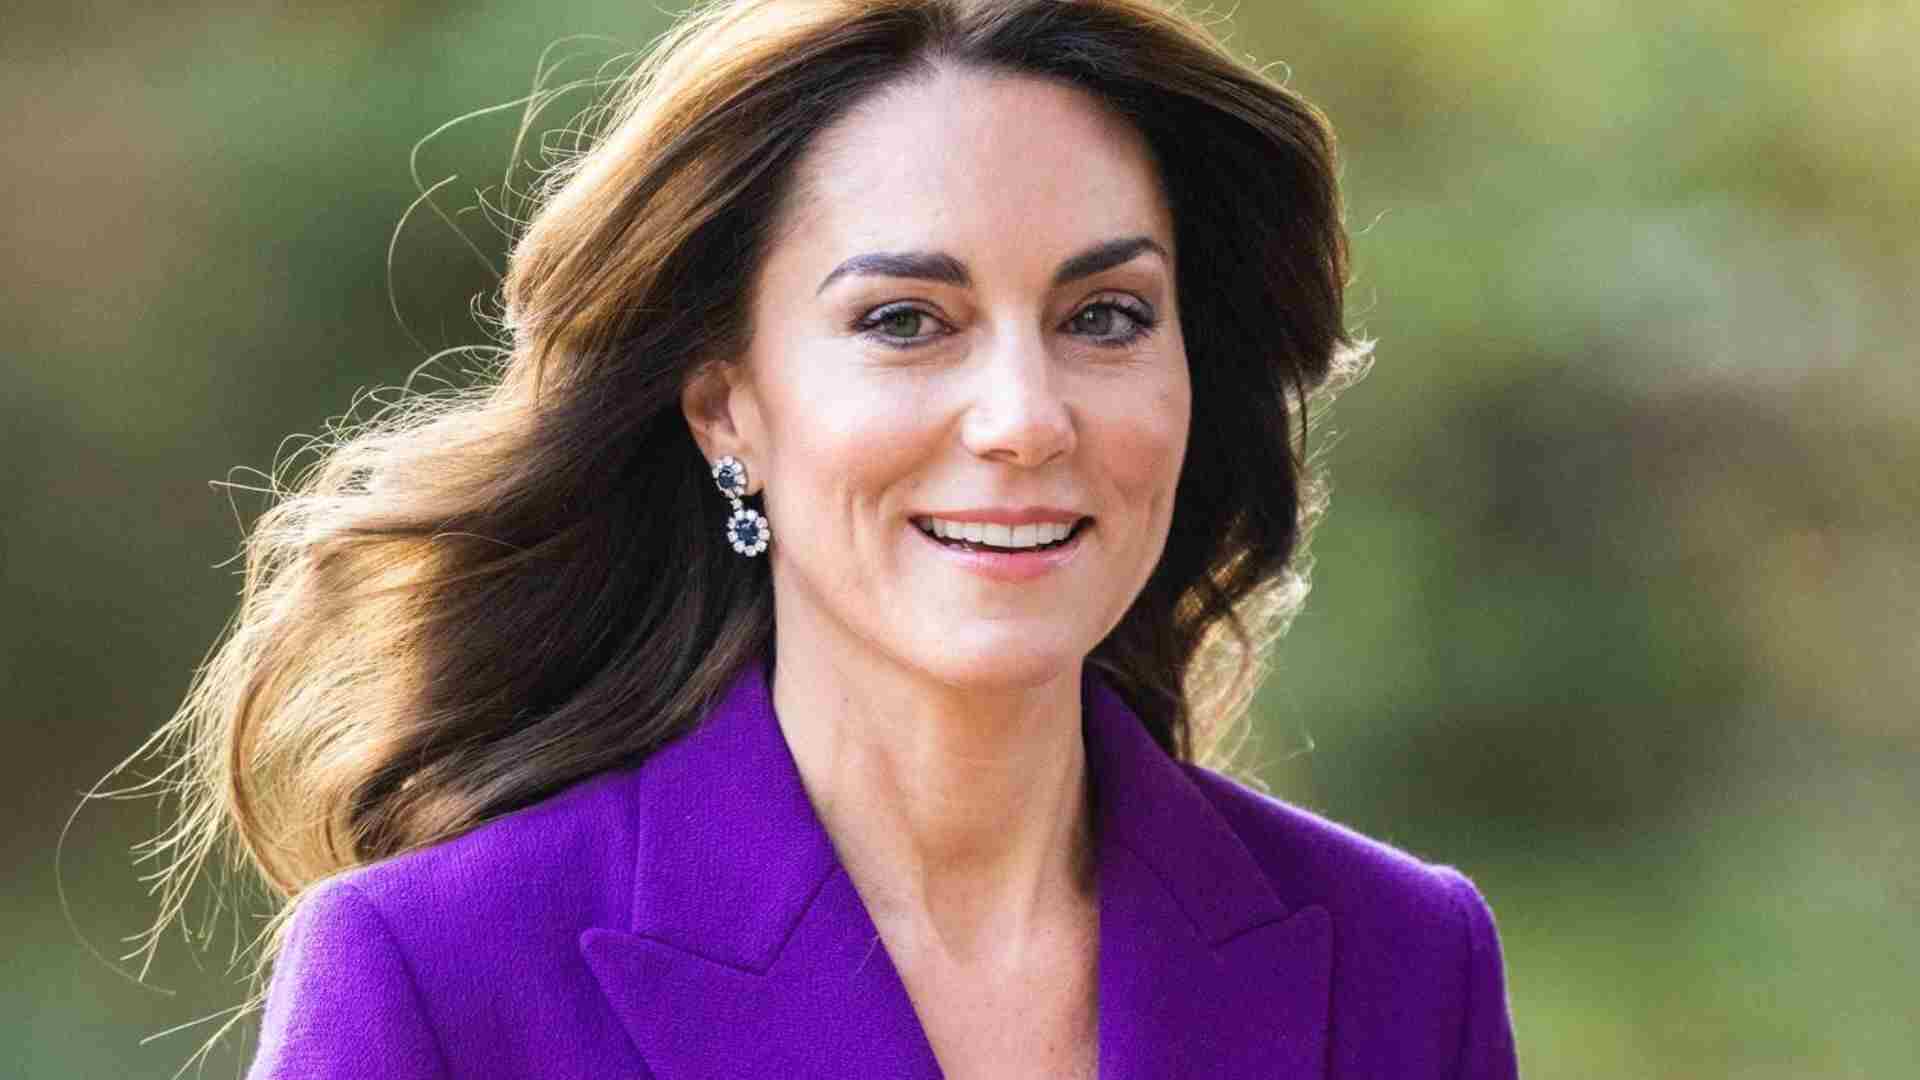 Kate Middleton Flooded With ‘Thousands’ Of Well-Wishes, Gifts Amid Cancer Battle